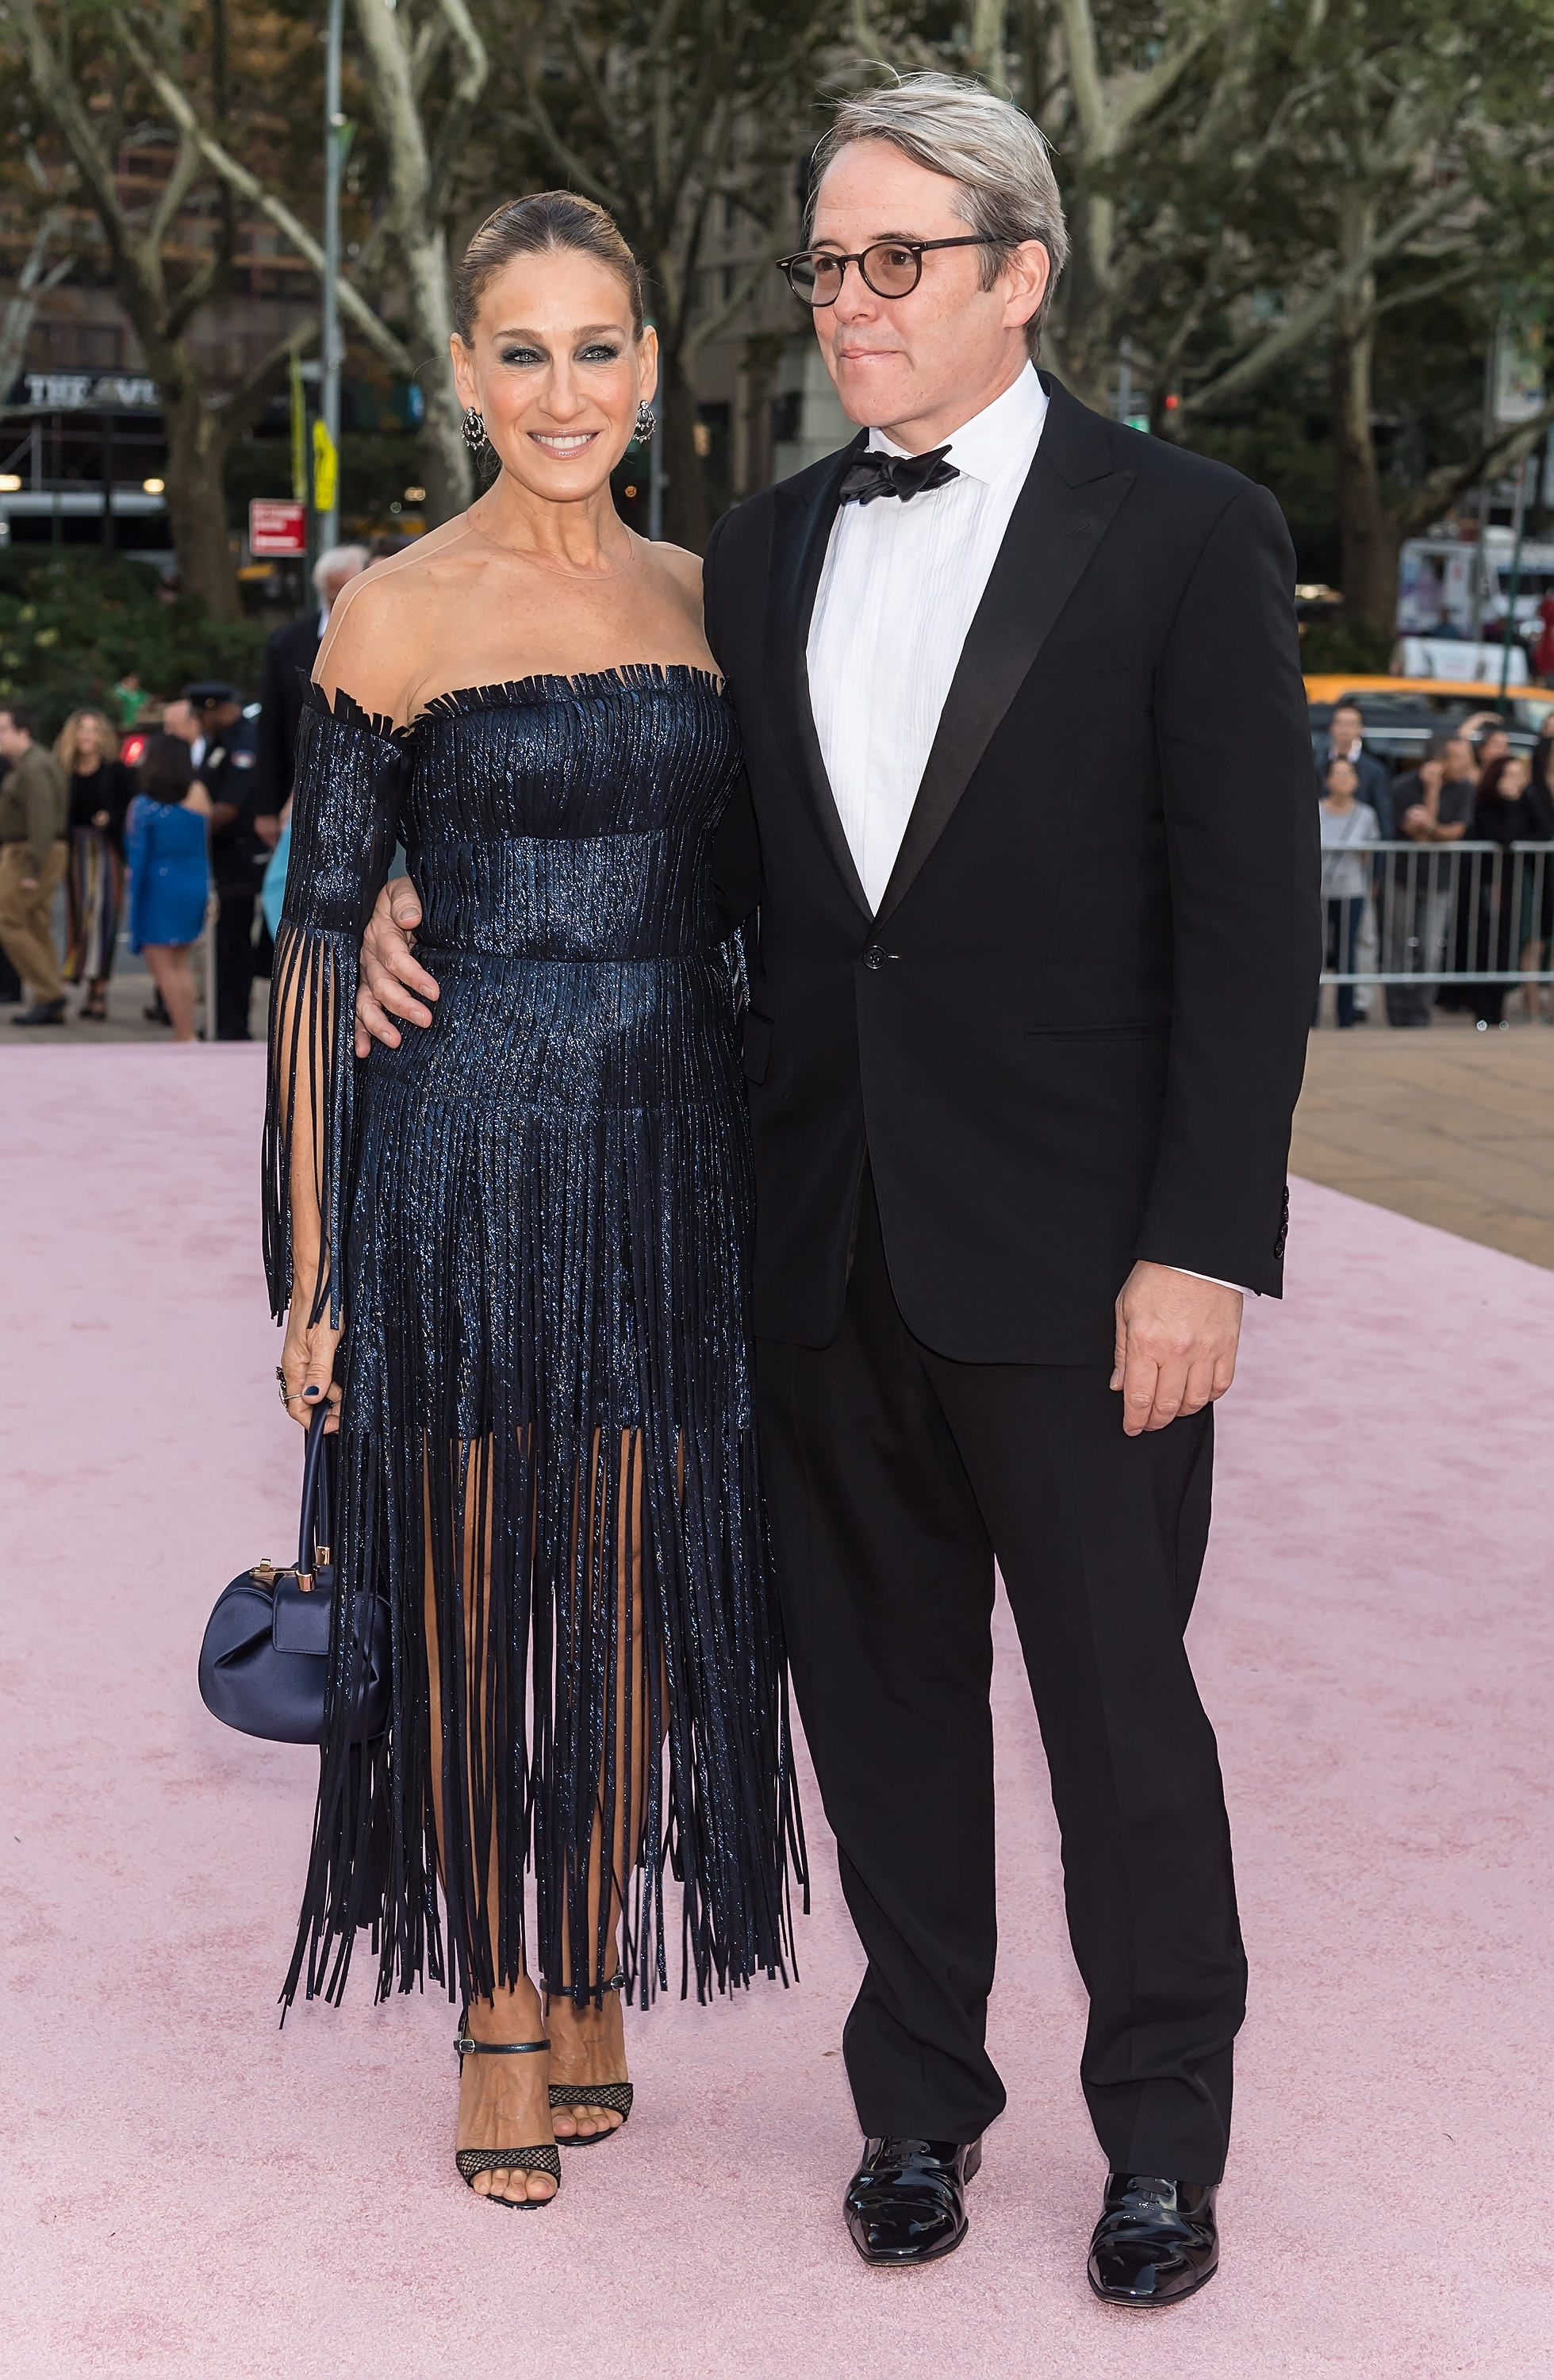 Actress/NYCB Board Vice Chair, Sarah Jessica Parker and husband actor Matthew Broderick attend the New York City Ballet's 2017 Fall Fashion Gala at David H. Koch Theater at Lincoln Center on September 28, 2017 in New York City. | Source: Getty Images